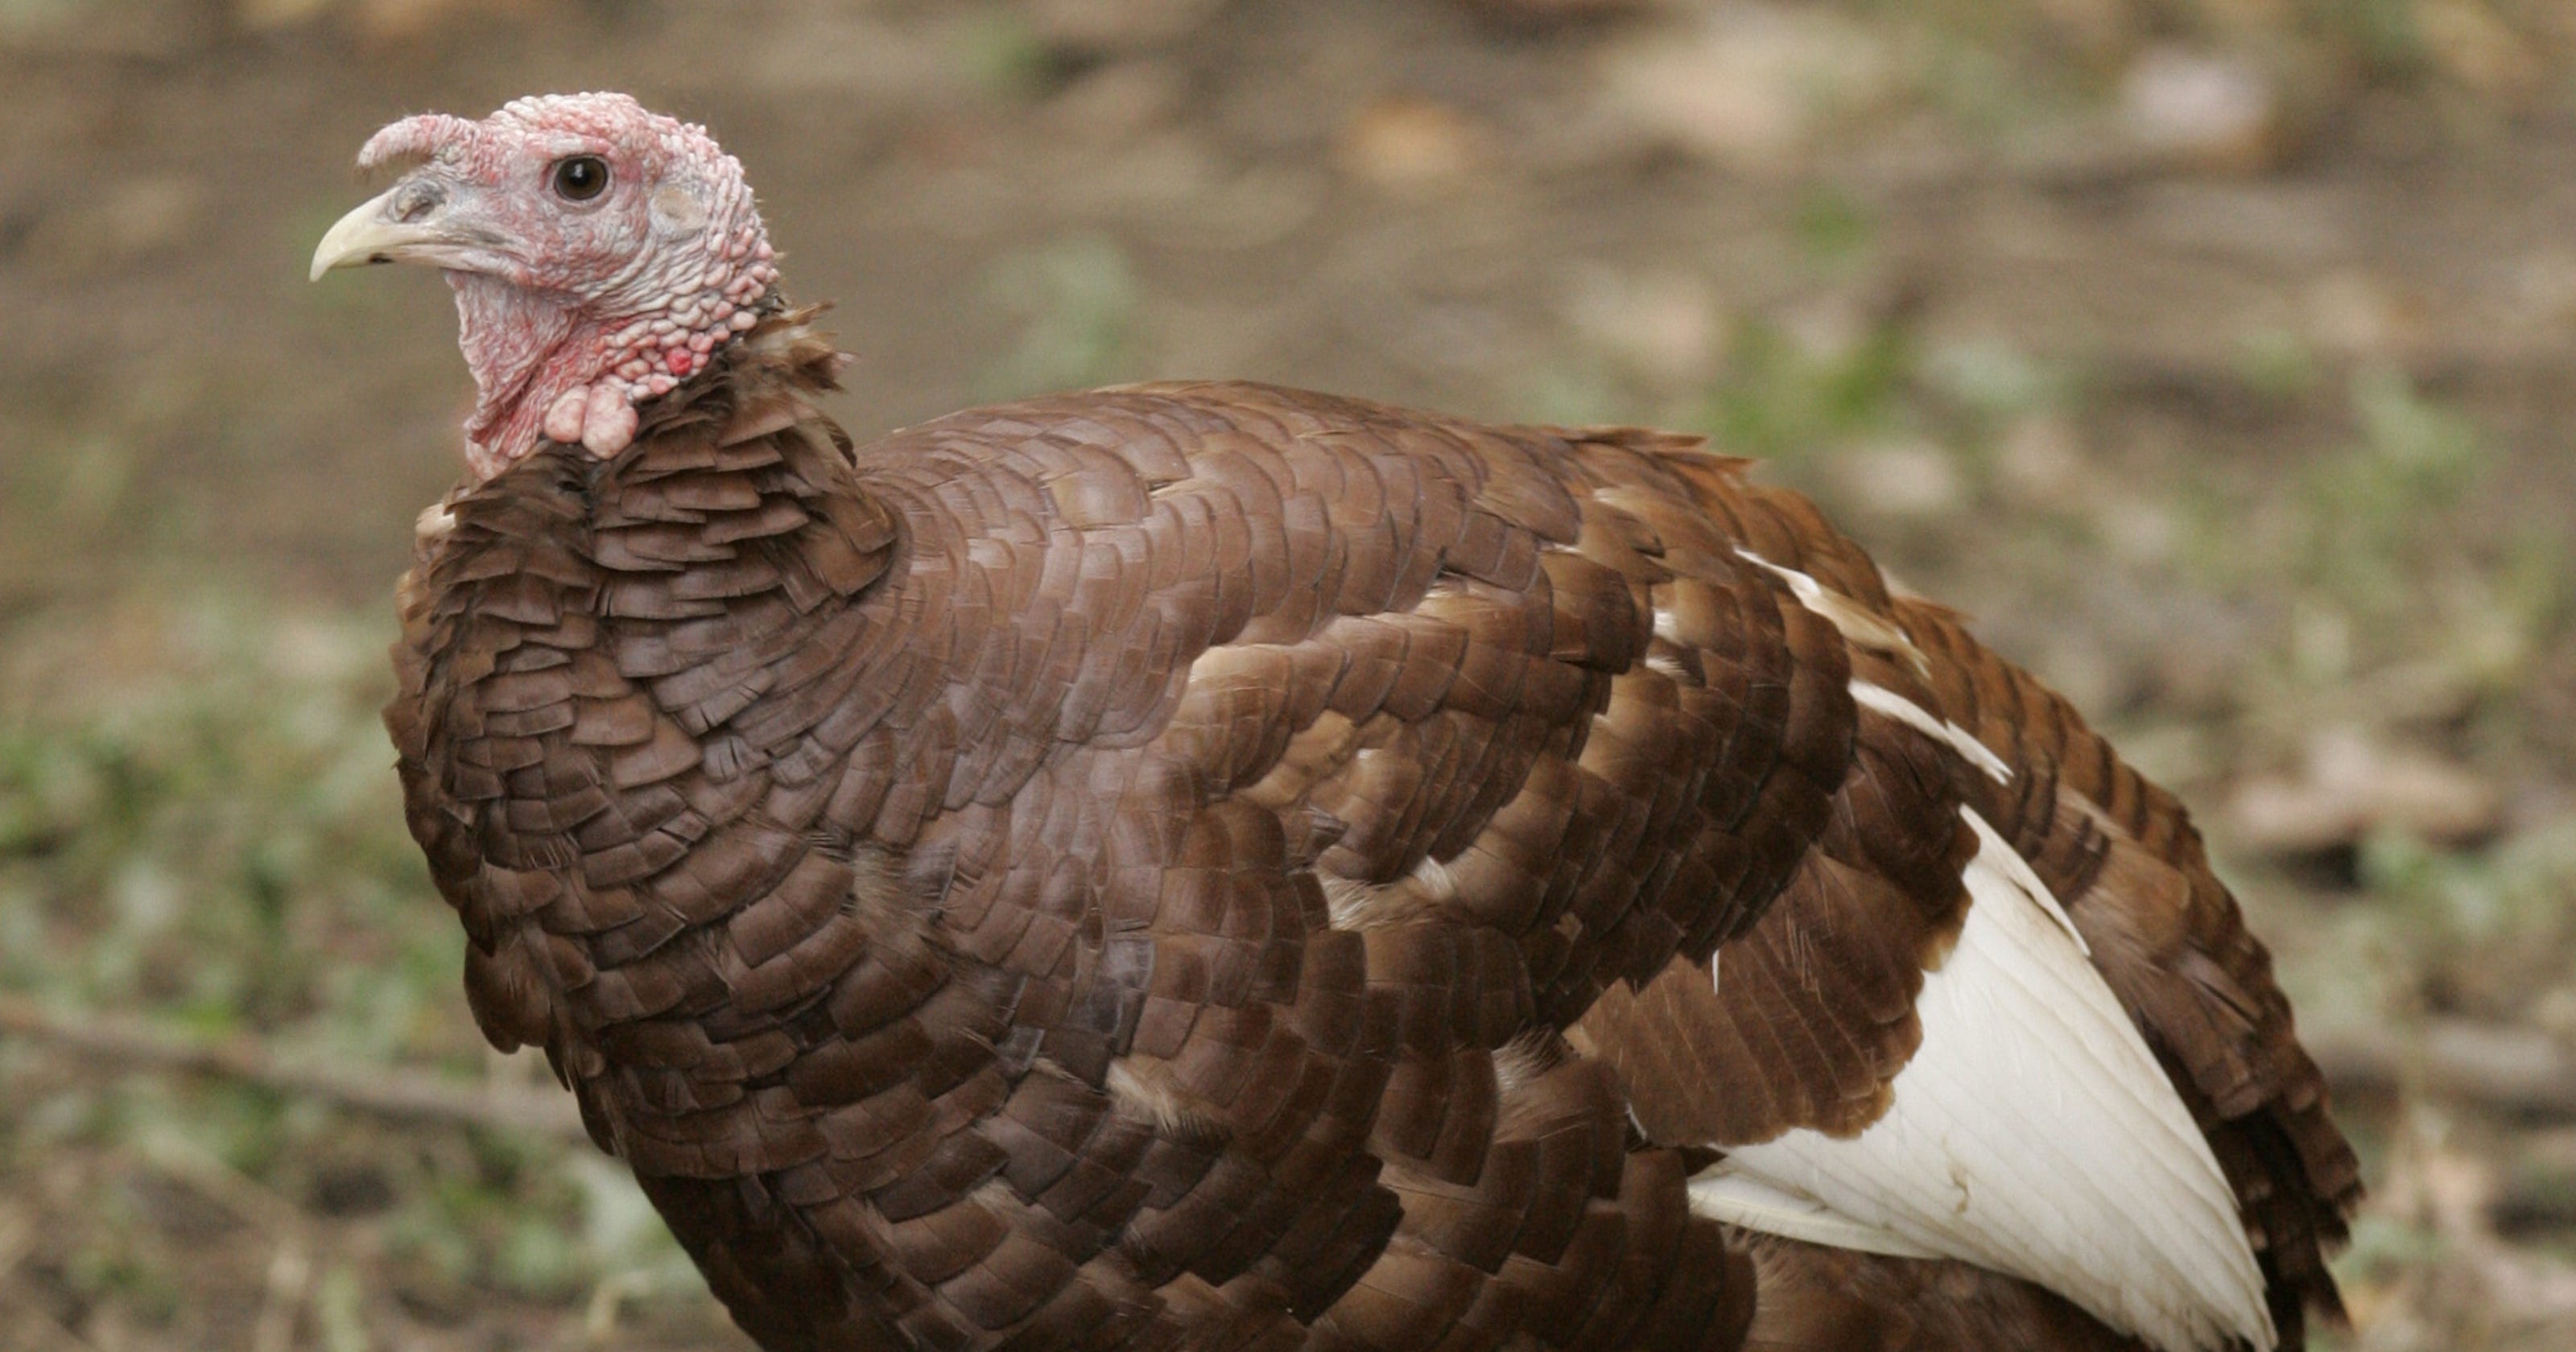 Where to buy a local turkey for Thanksgiving